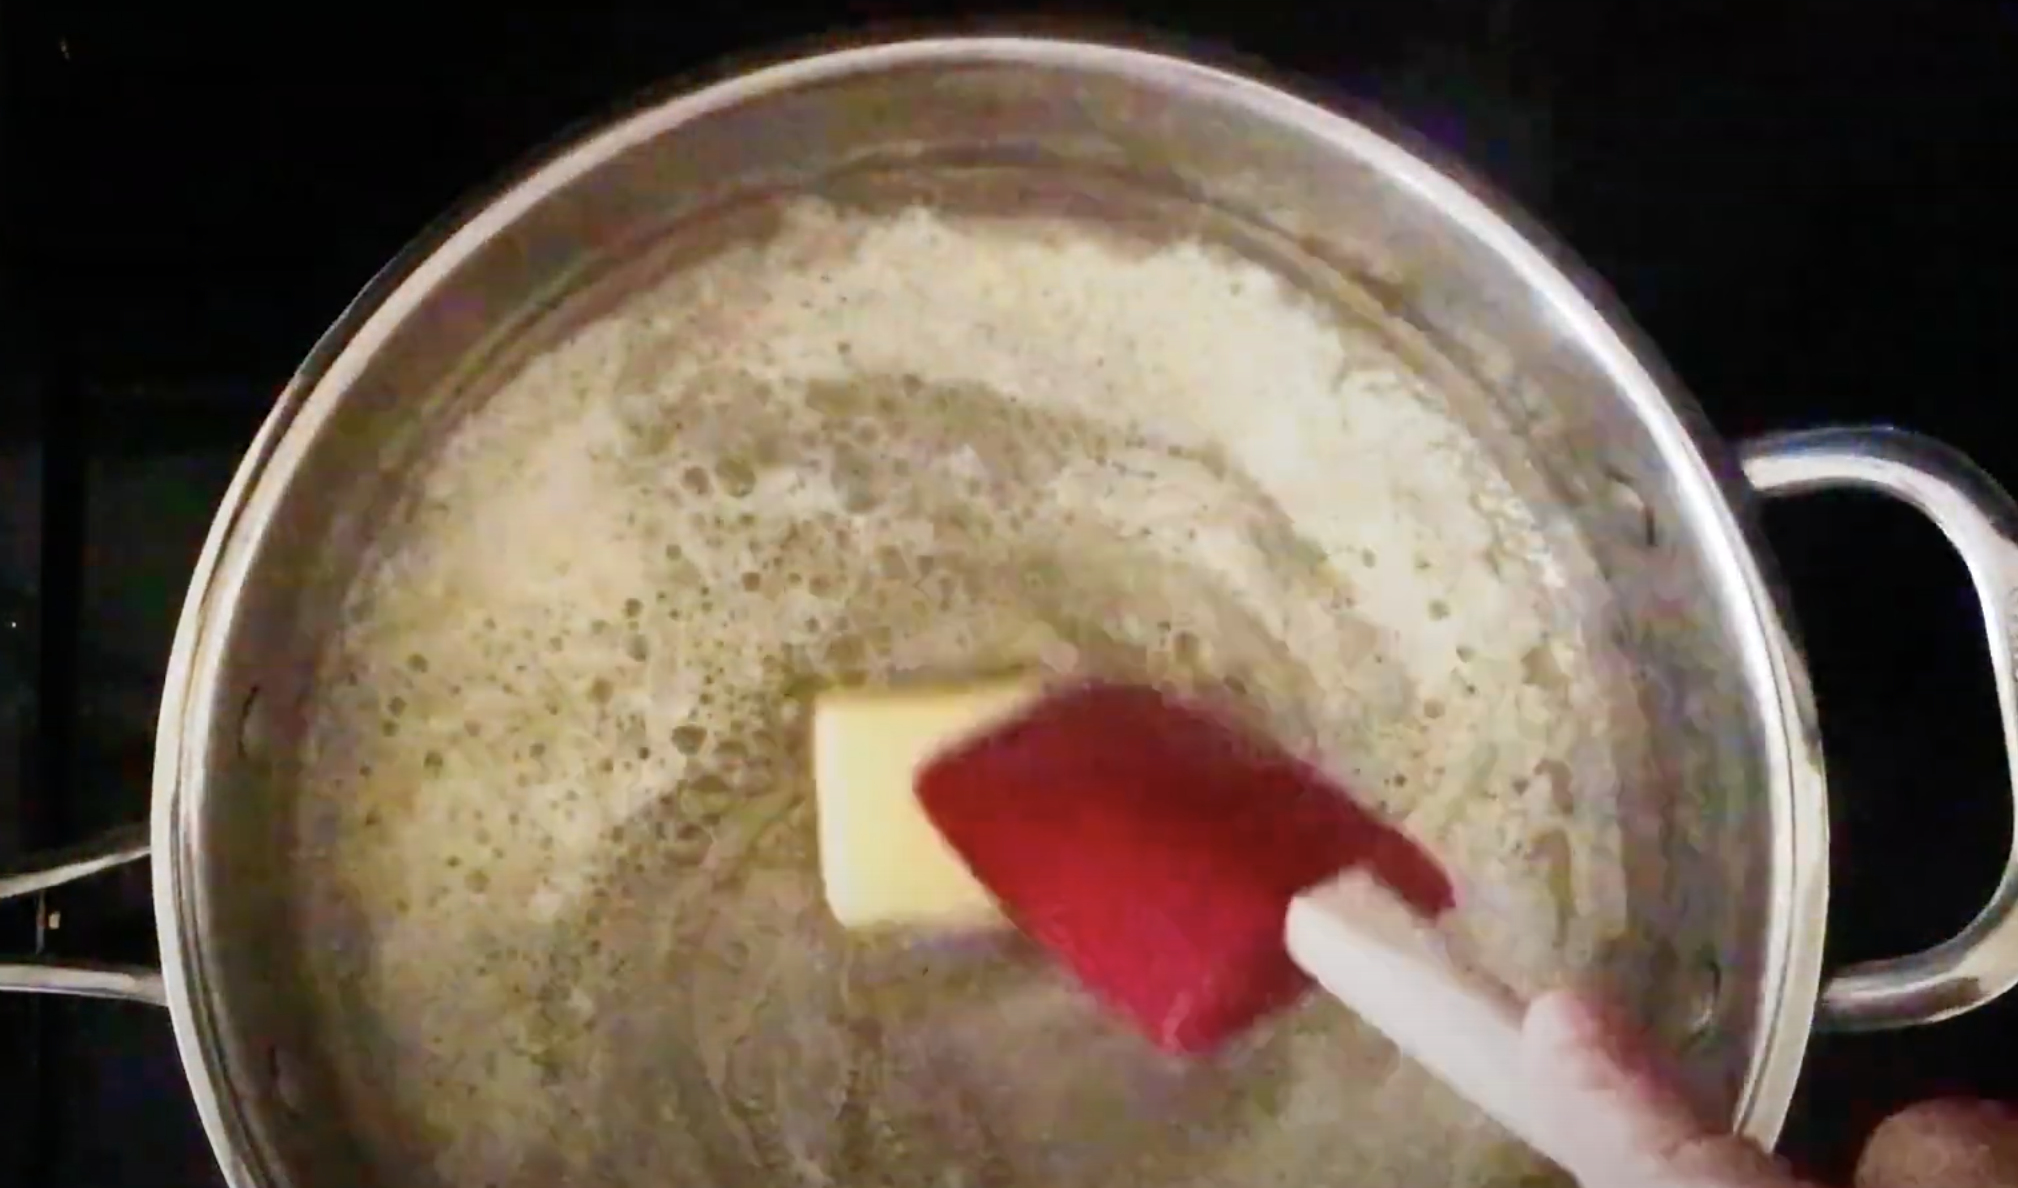 Butter being melted in a skillet